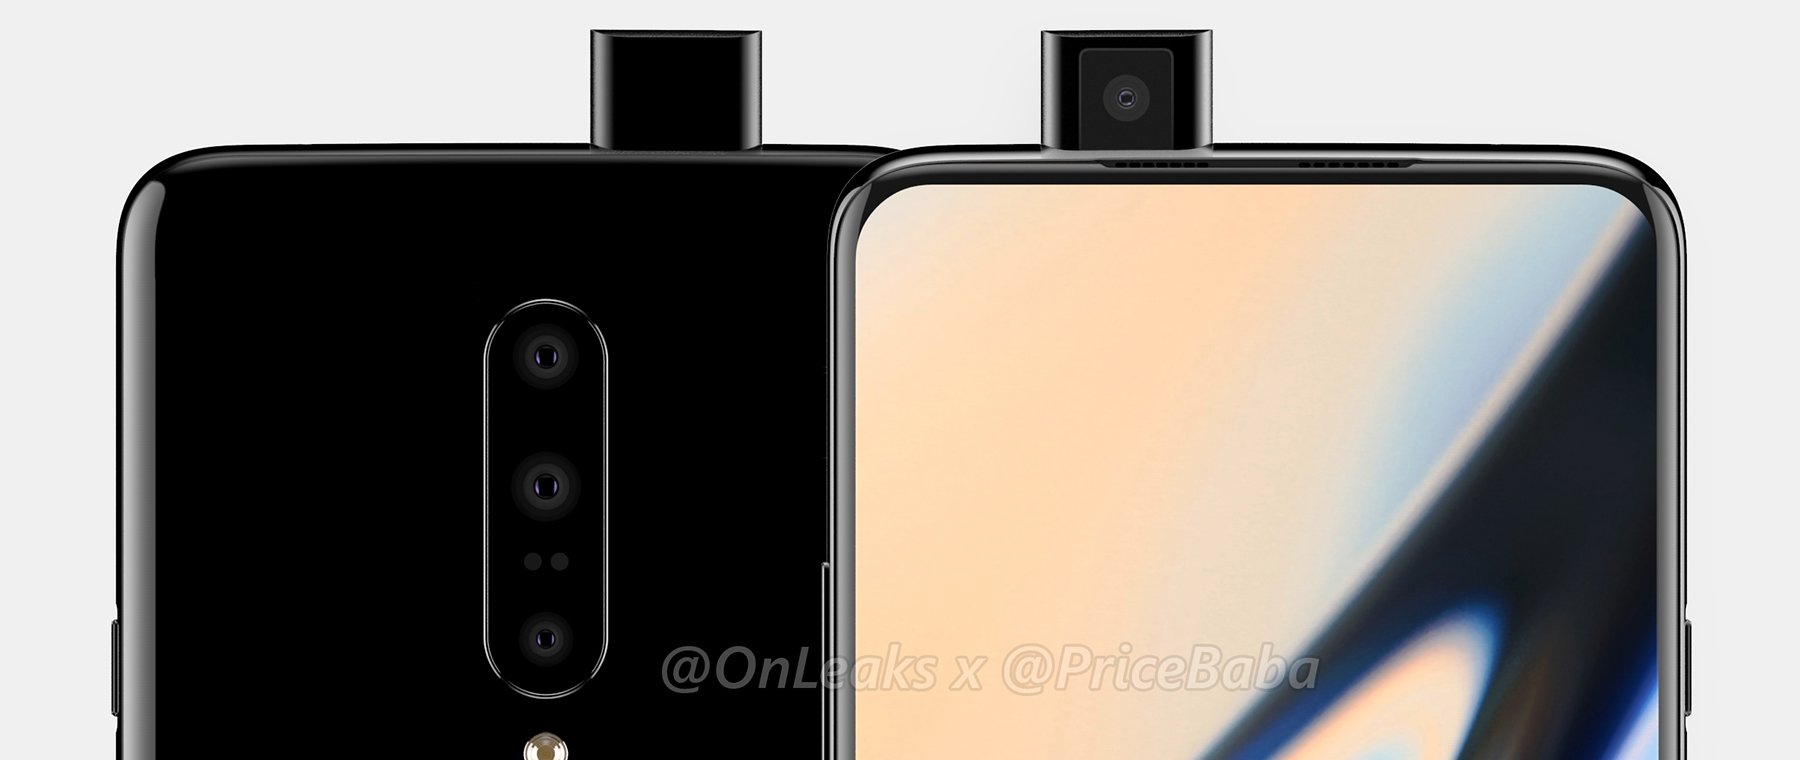 Alleged renders of the OnePlus 7 pop out selfie camera